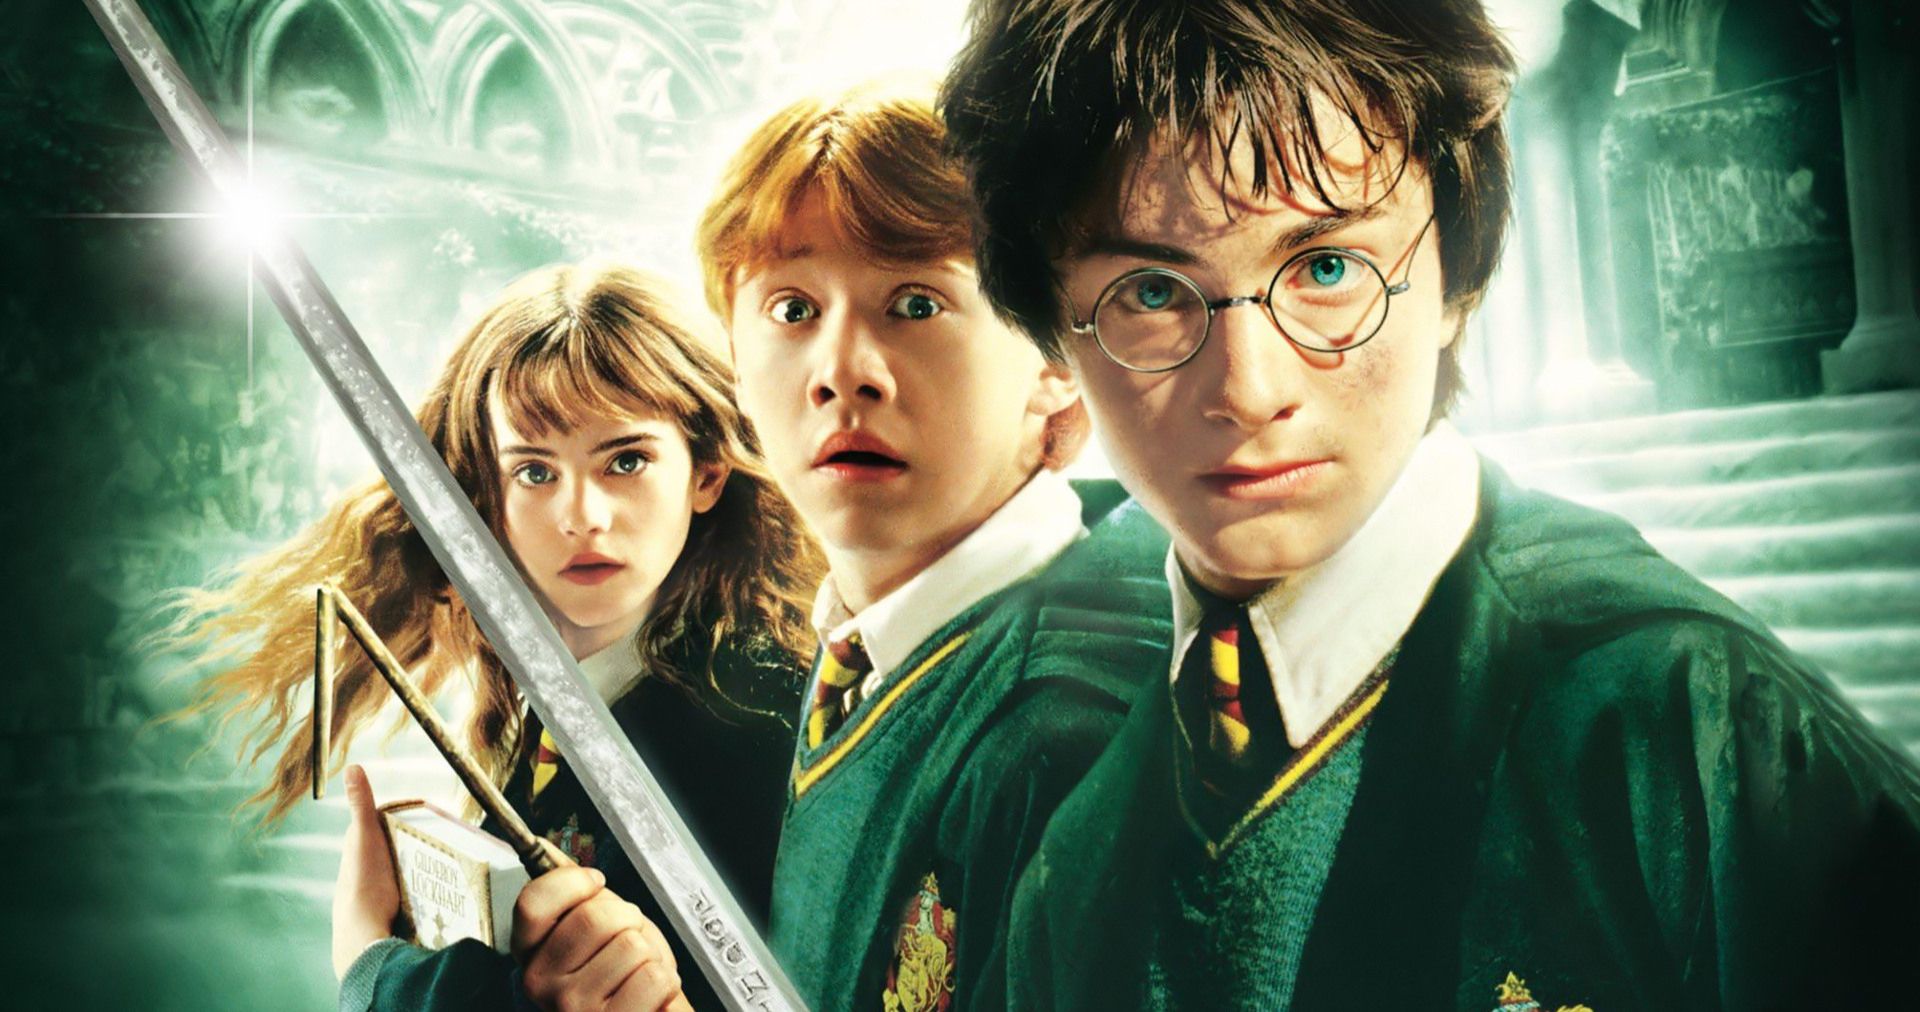 Daniel Radcliffe Is Intensely Embarrassed by Some of His Early Harry Potter Acting